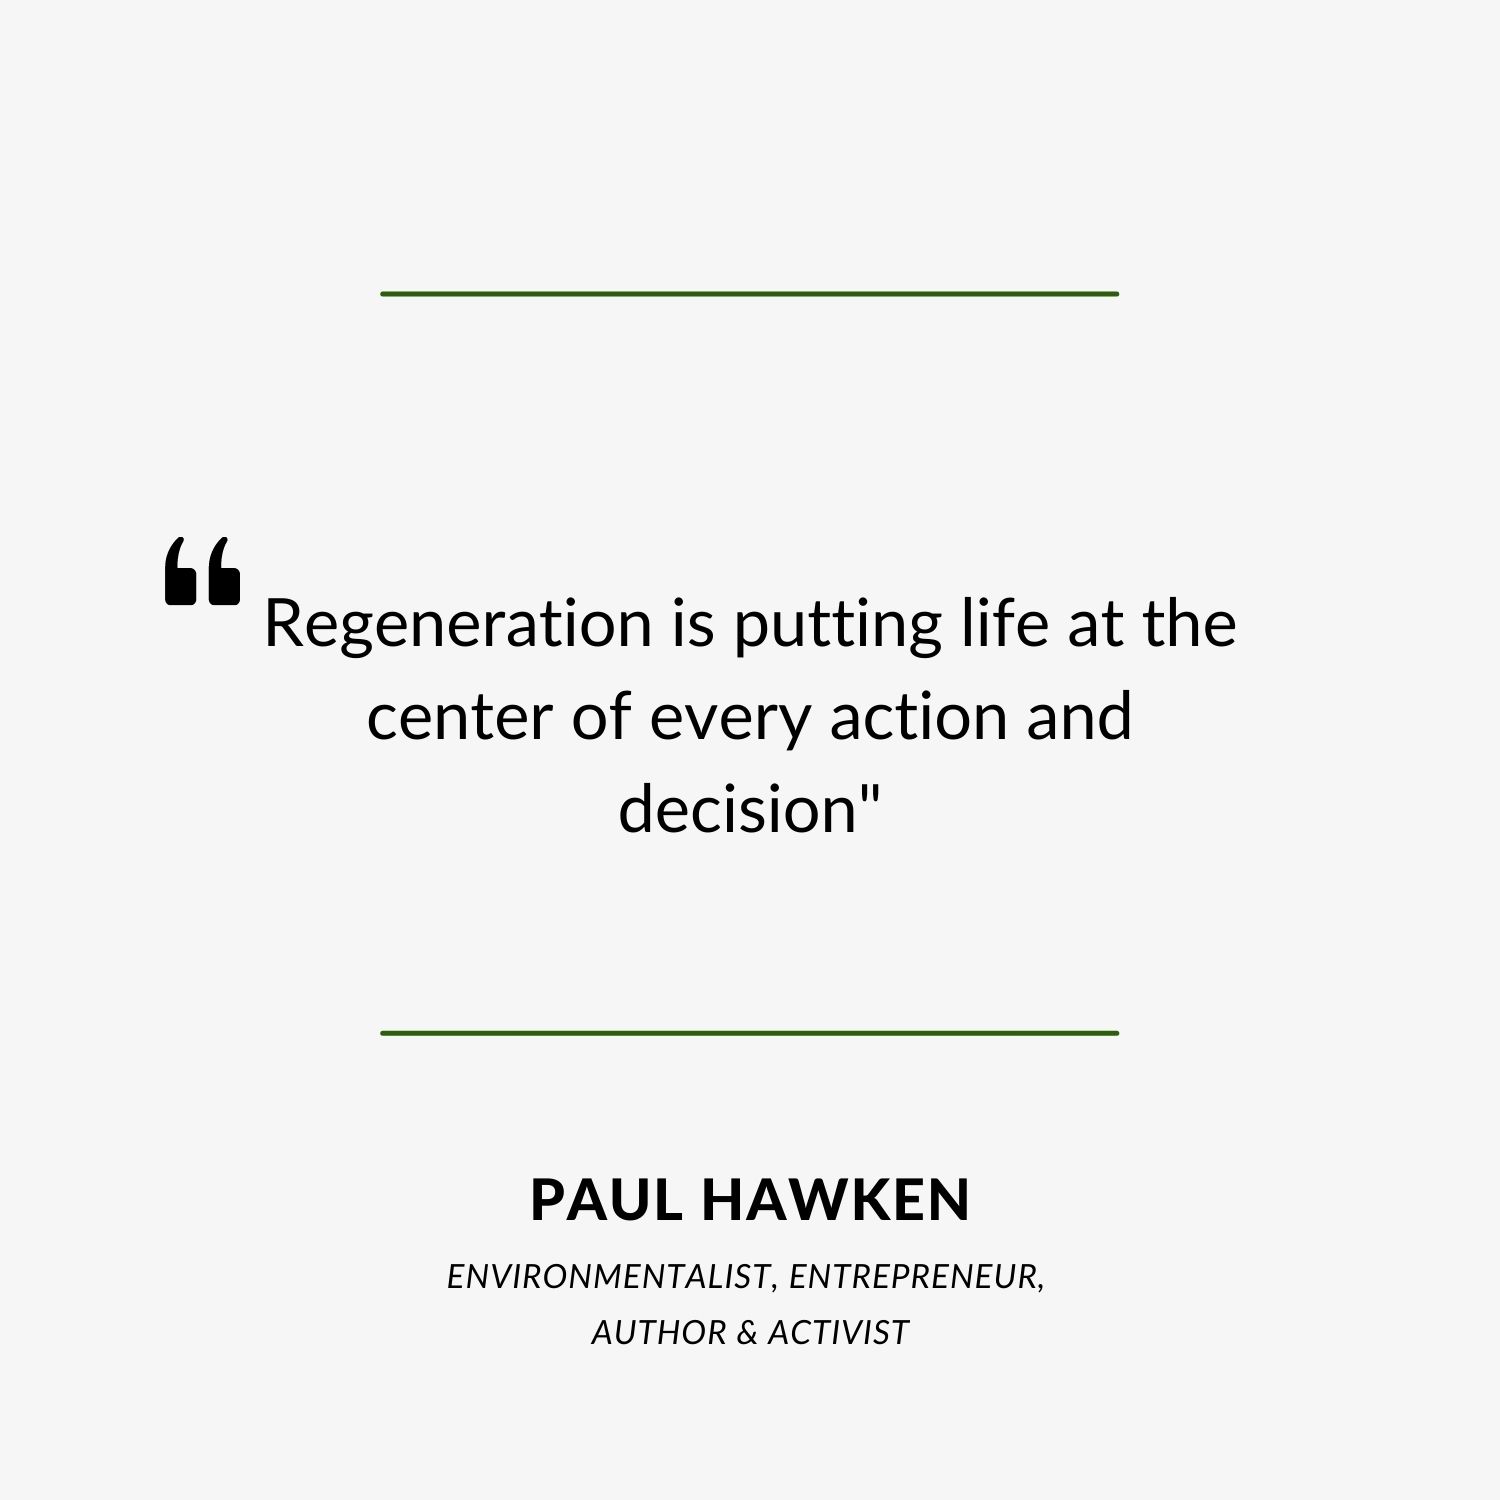 Regeneration is putting life at the center of every action and decision